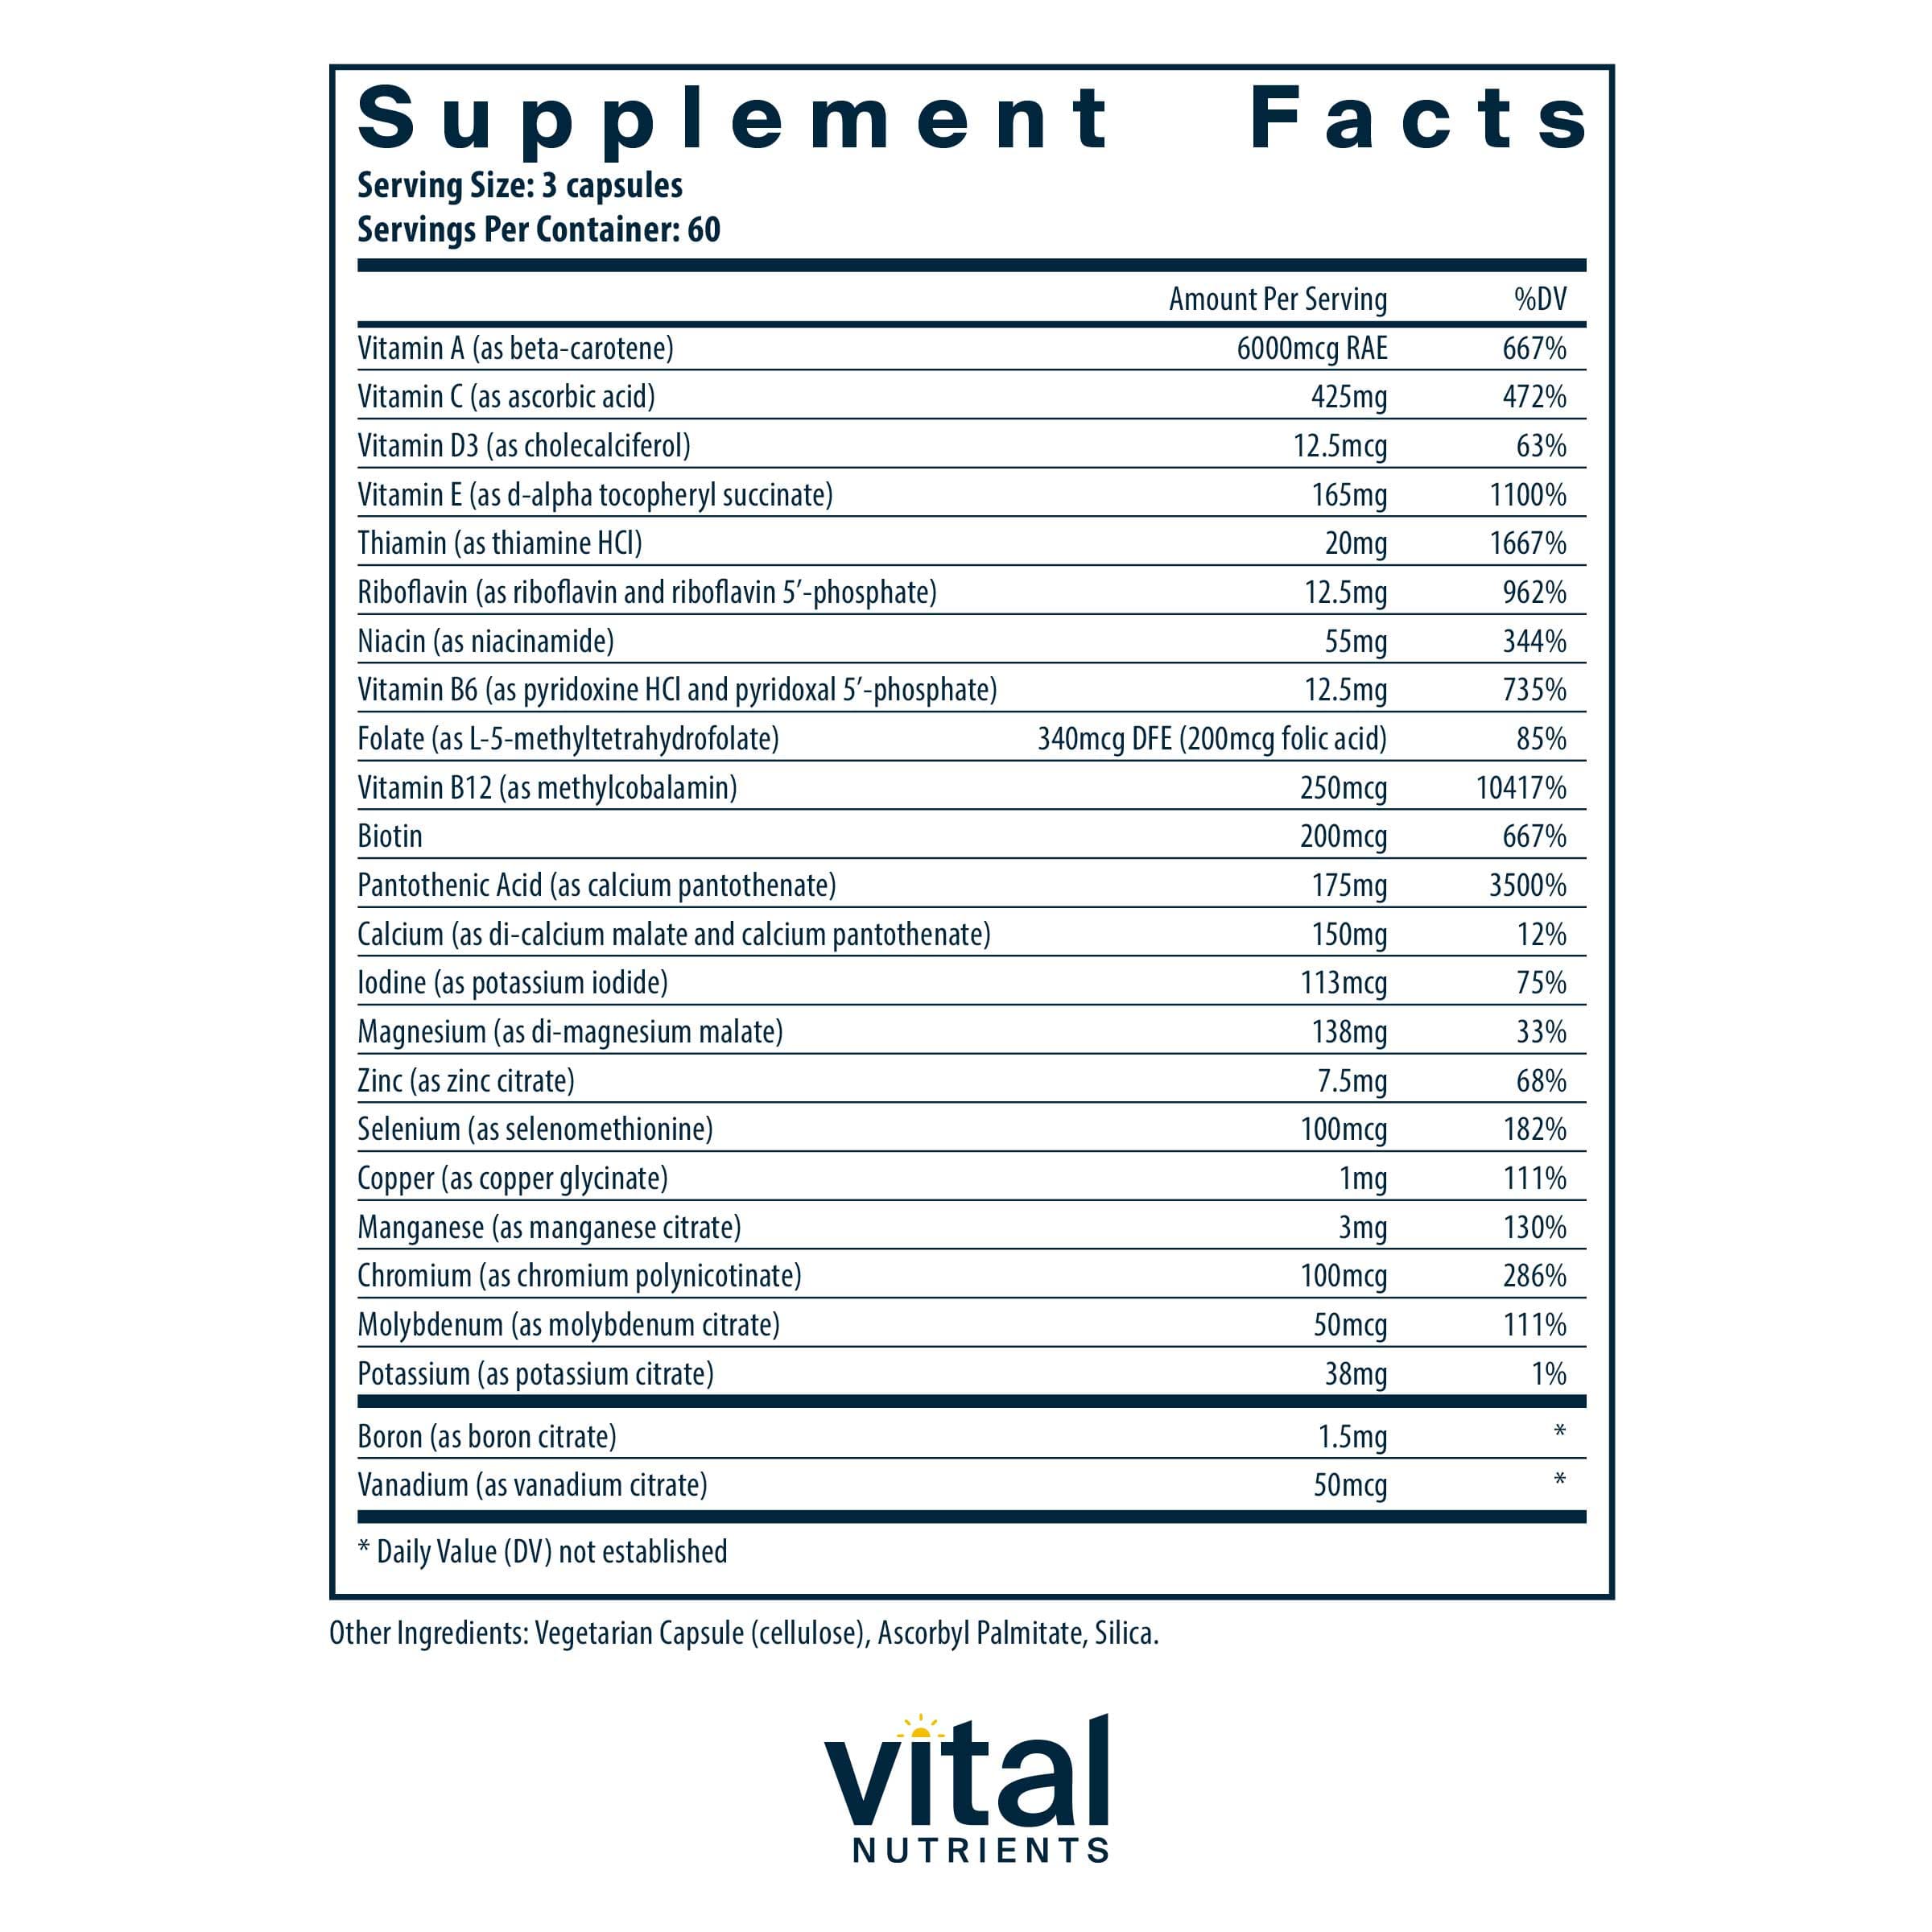 Vital Nutrients Multi-Nutrients Citrate/Malate with Copper, without Iron (Formerly Multi-Nutrients 2) Ingredients